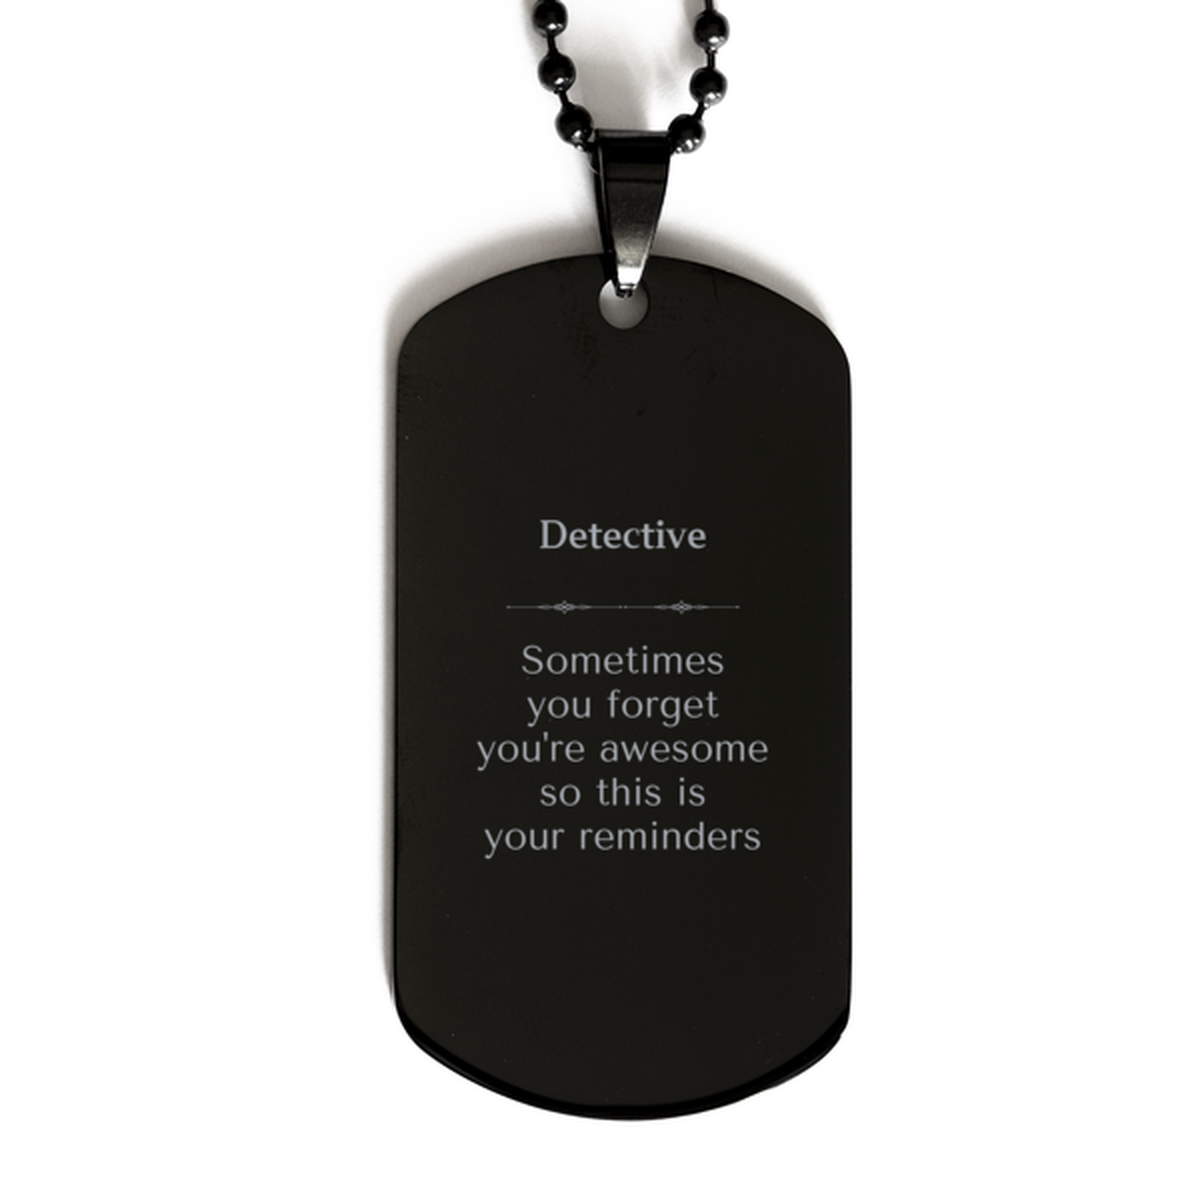 Sentimental Detective Black Dog Tag, Detective Sometimes you forget you're awesome so this is your reminders, Graduation Christmas Birthday Gifts for Detective, Men, Women, Coworkers